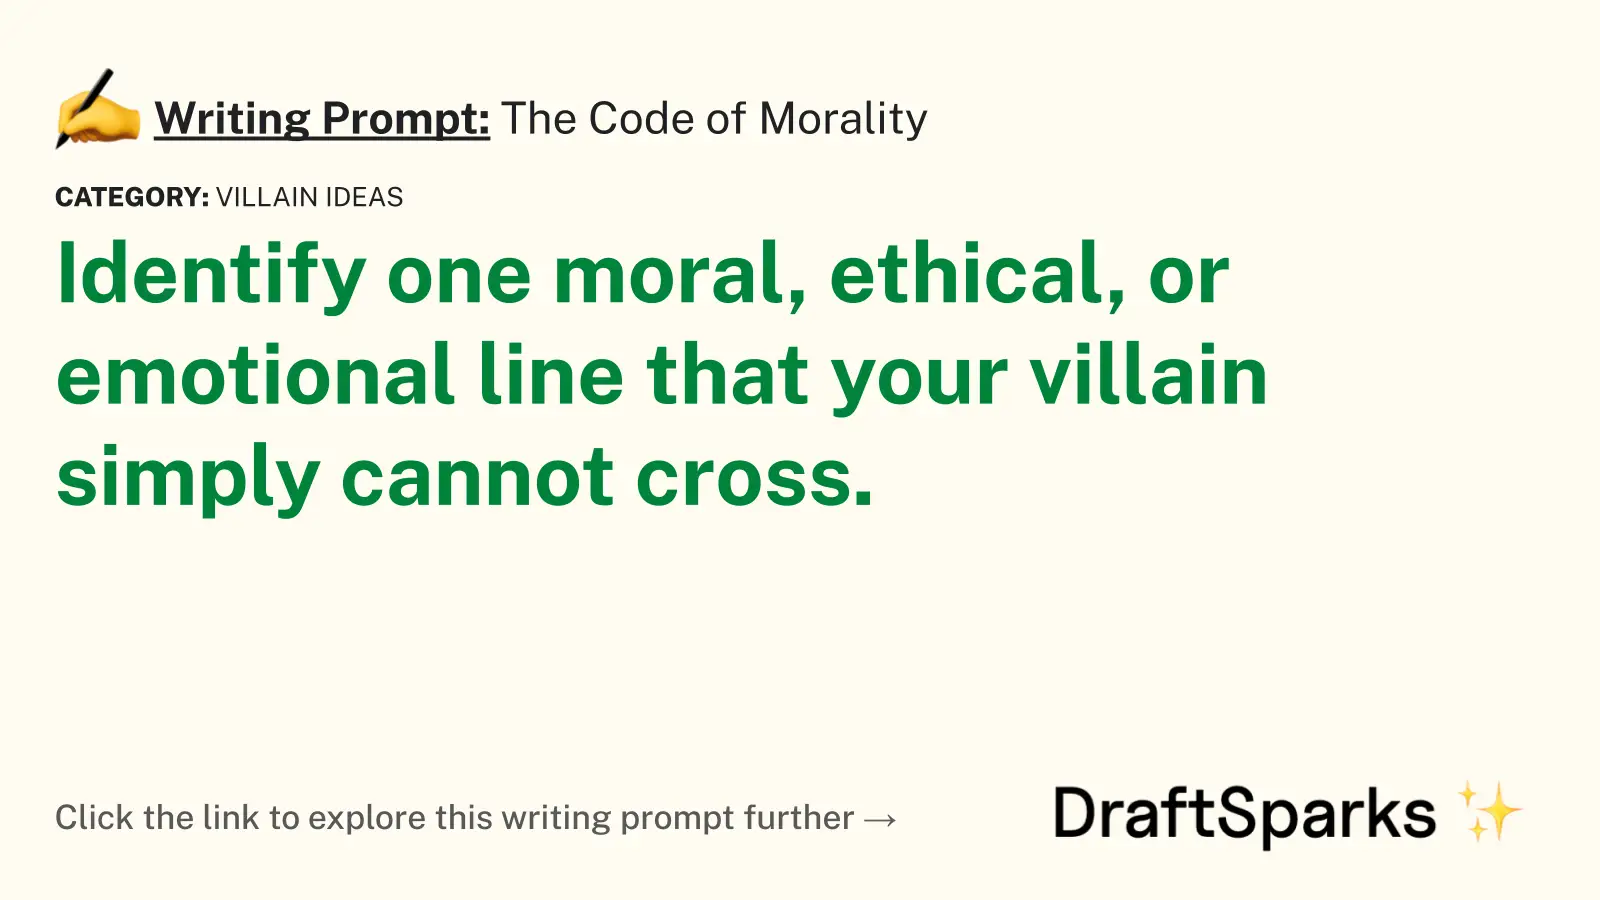 The Code of Morality